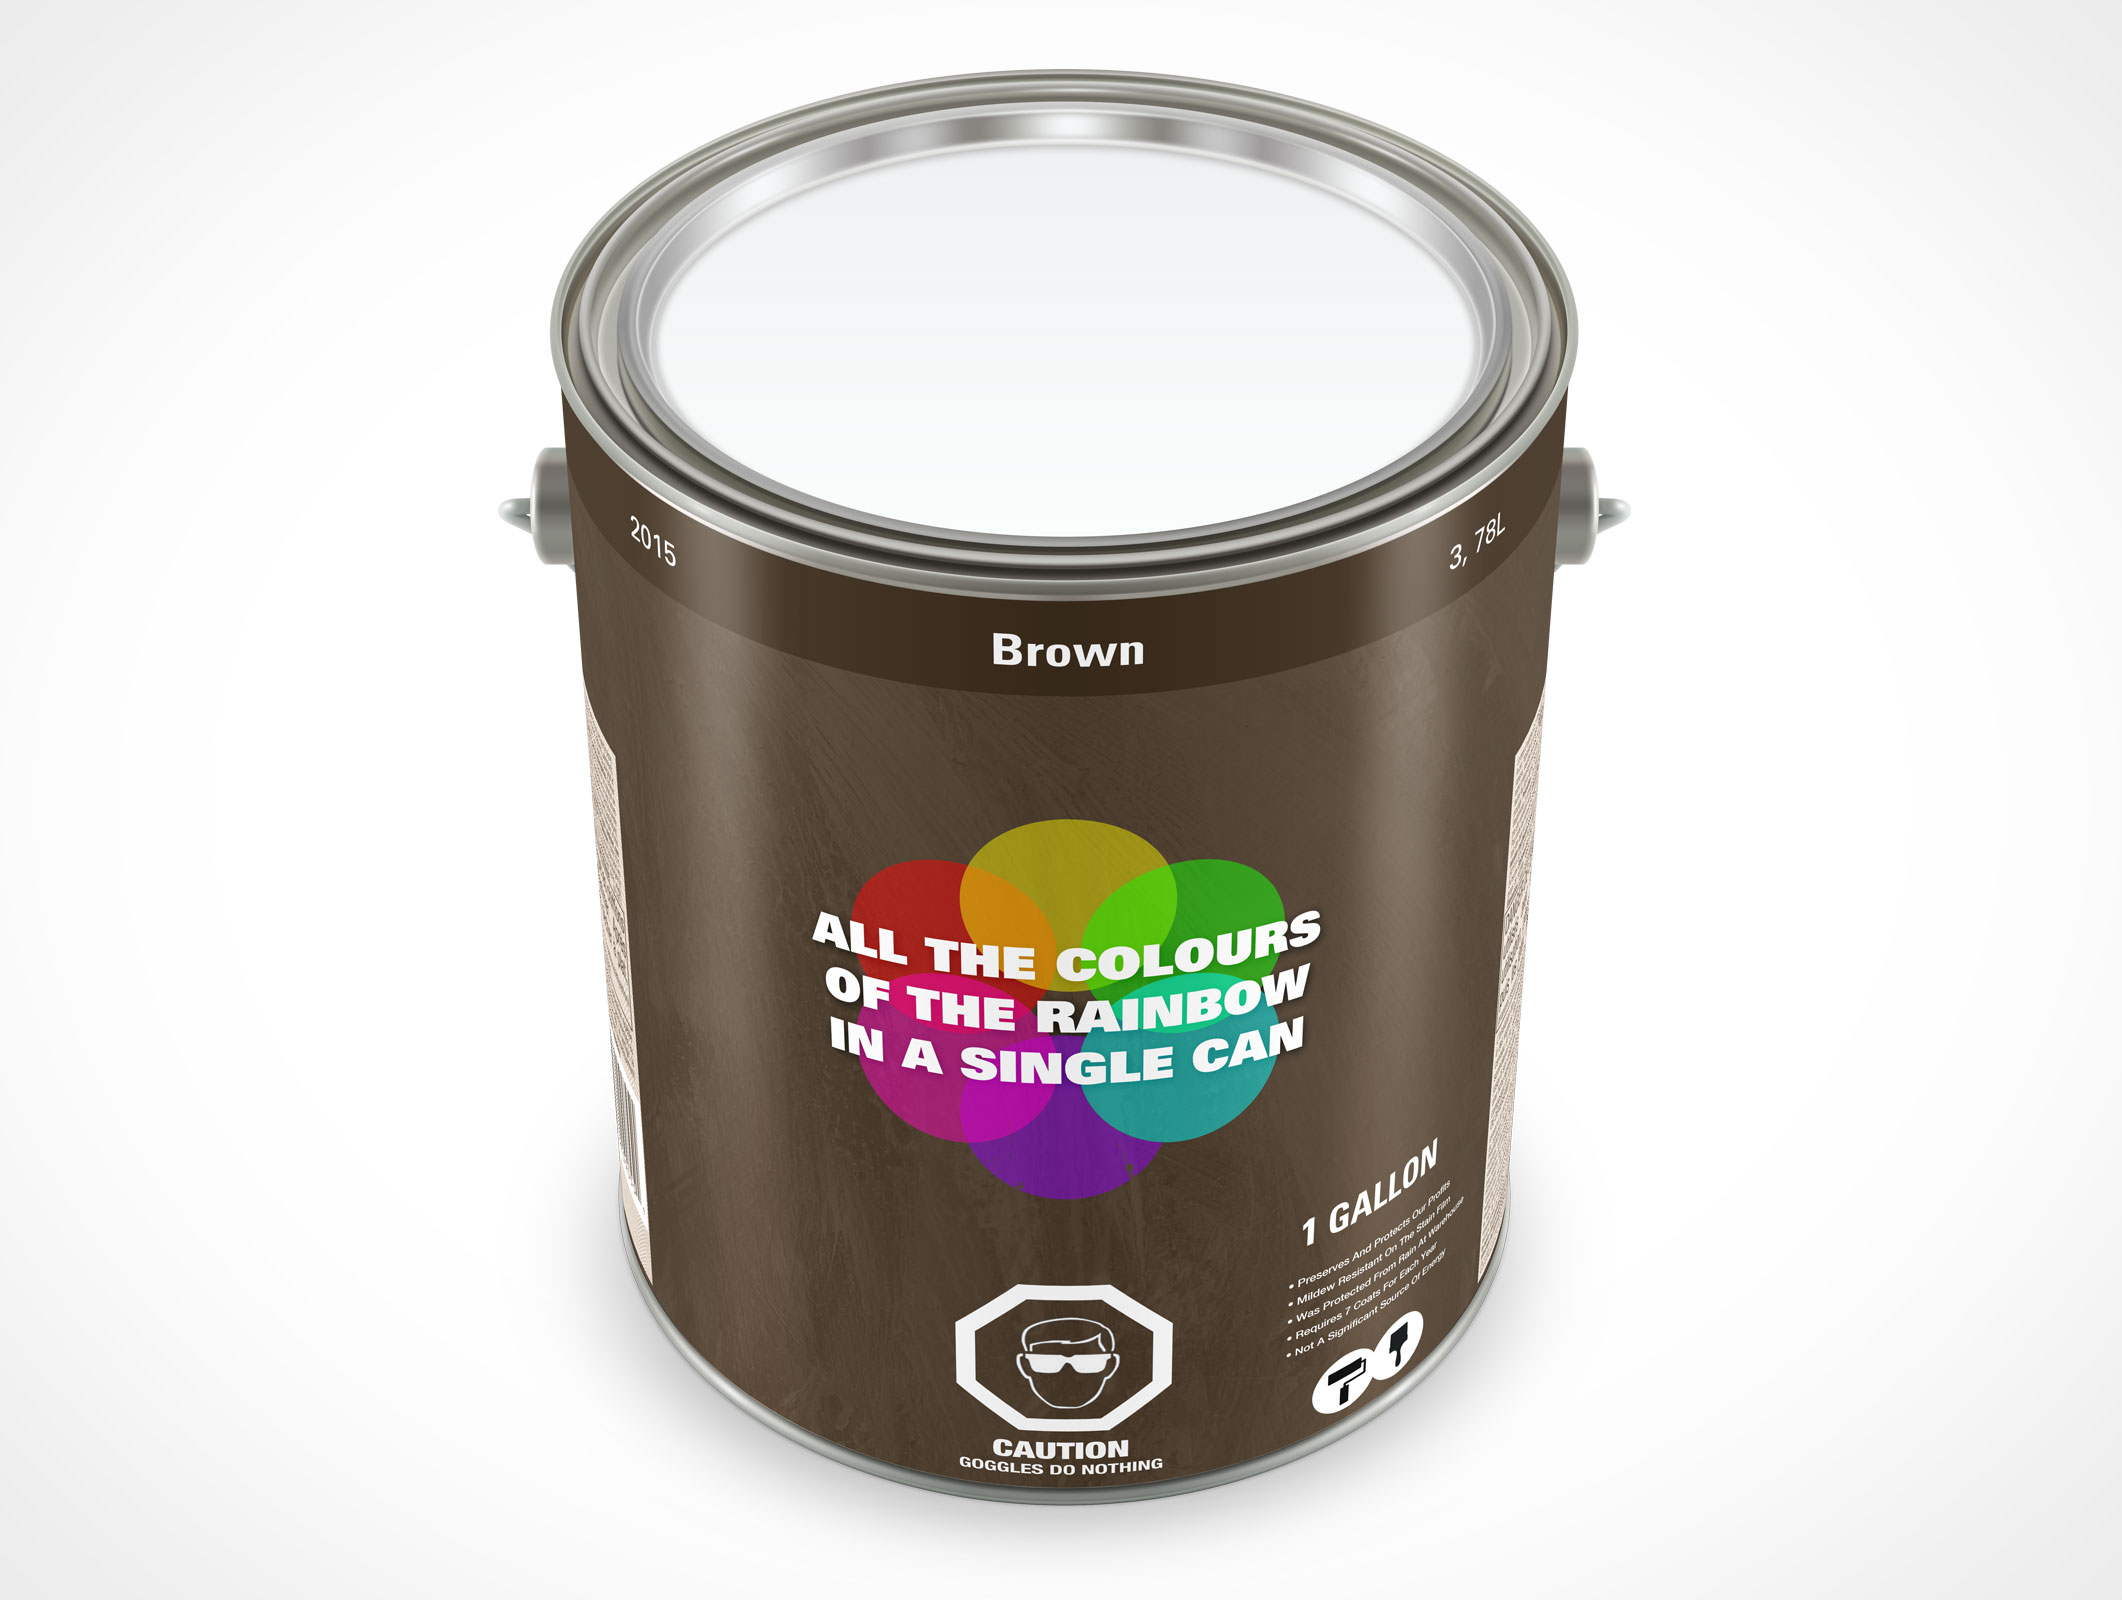 1 Gallon Paint Can Mockup 24r3